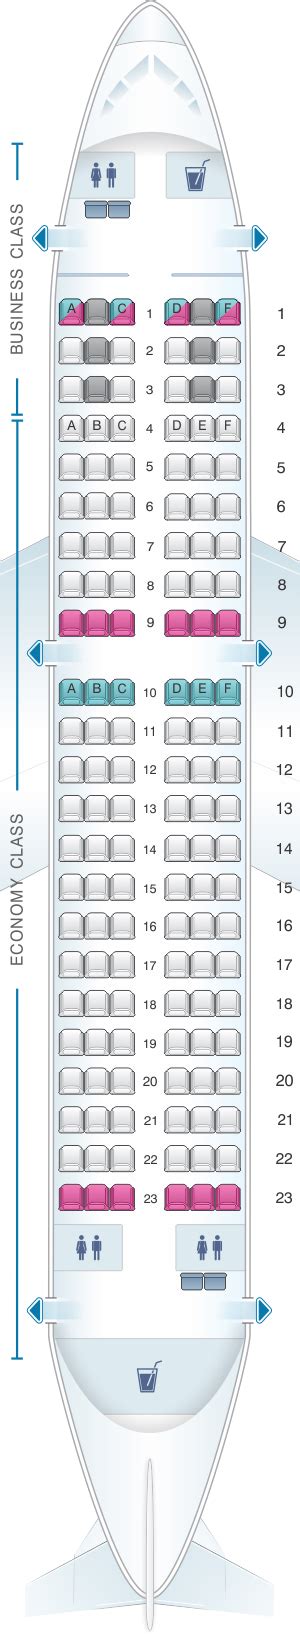 Seat Map Rossiya Airlines Airbus A319 132pax Seatmaestro